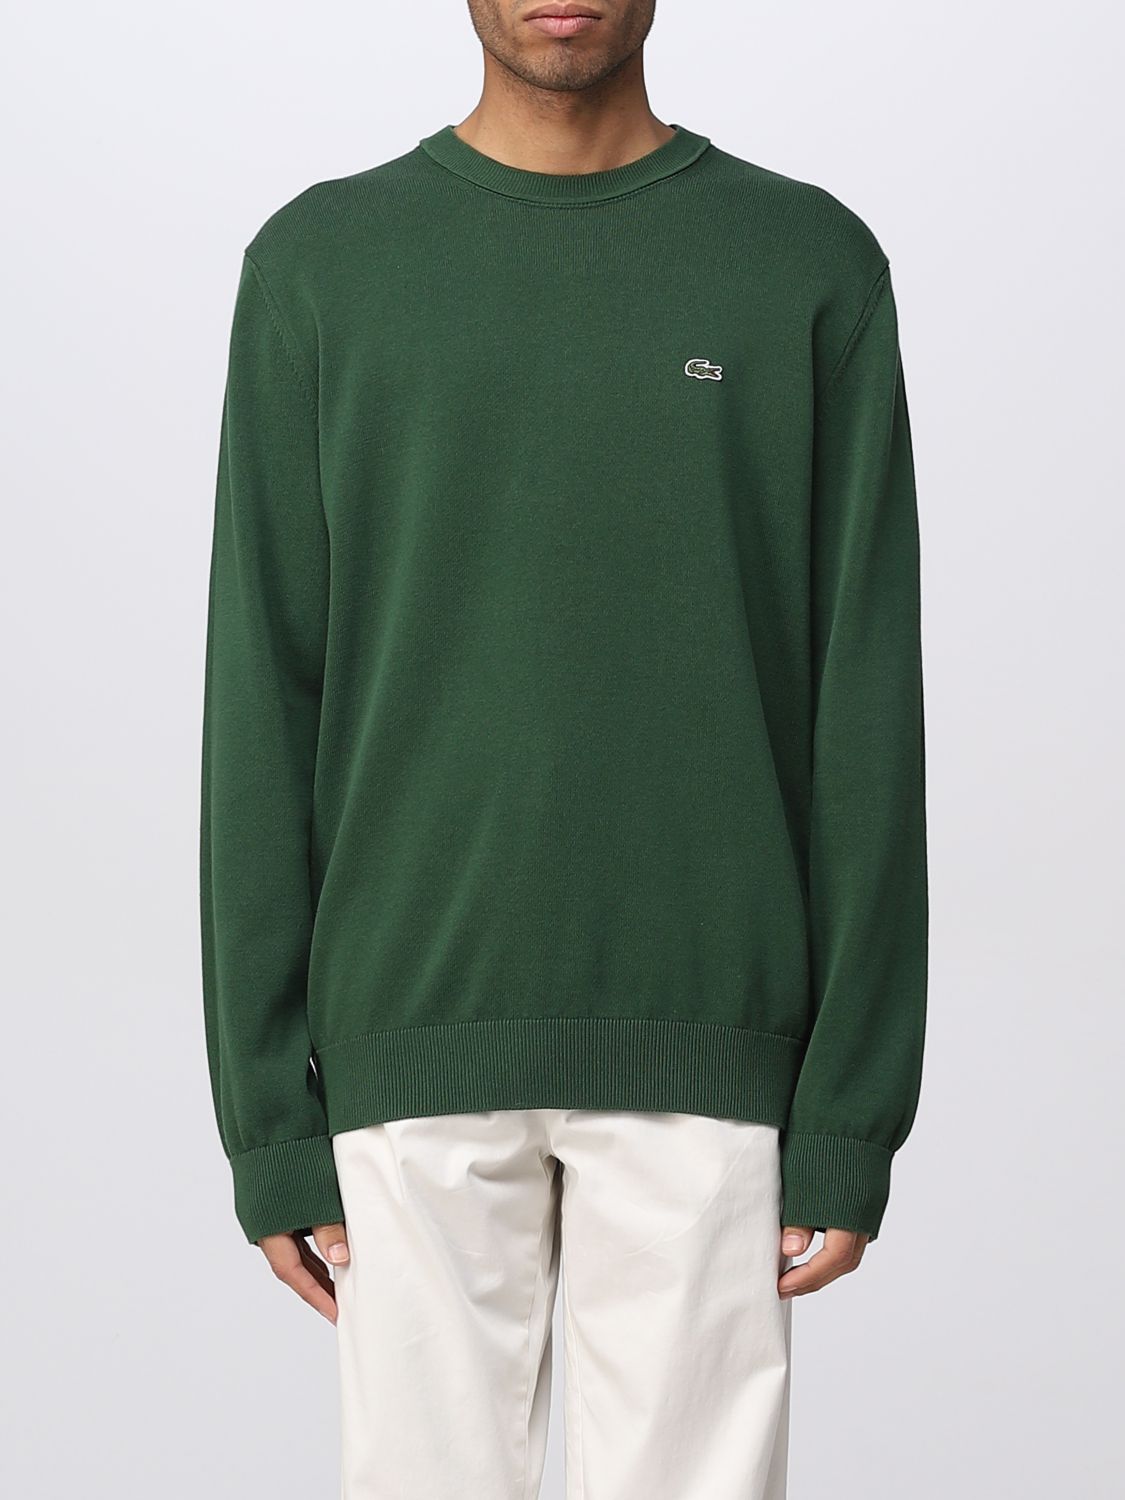 Enten vermomming Seminarie LACOSTE: sweater for man - Green | Lacoste sweater AH2193 online on  GIGLIO.COM